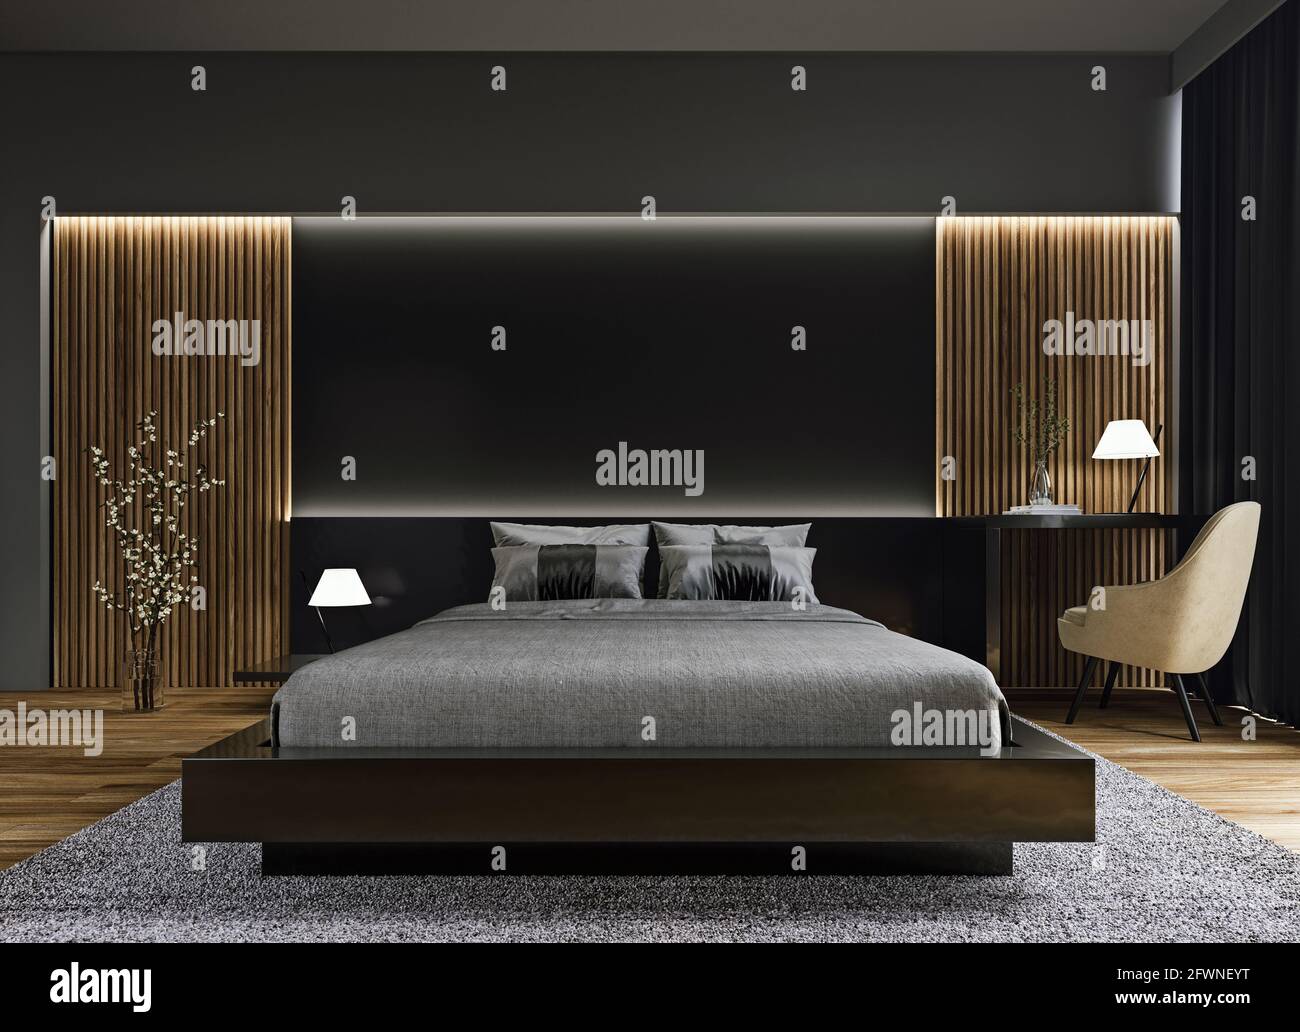 Modern interior design of dark black luxurious bedroom with wood slat wall and accent lighting, mock-up, 3d rendering Stock Photo